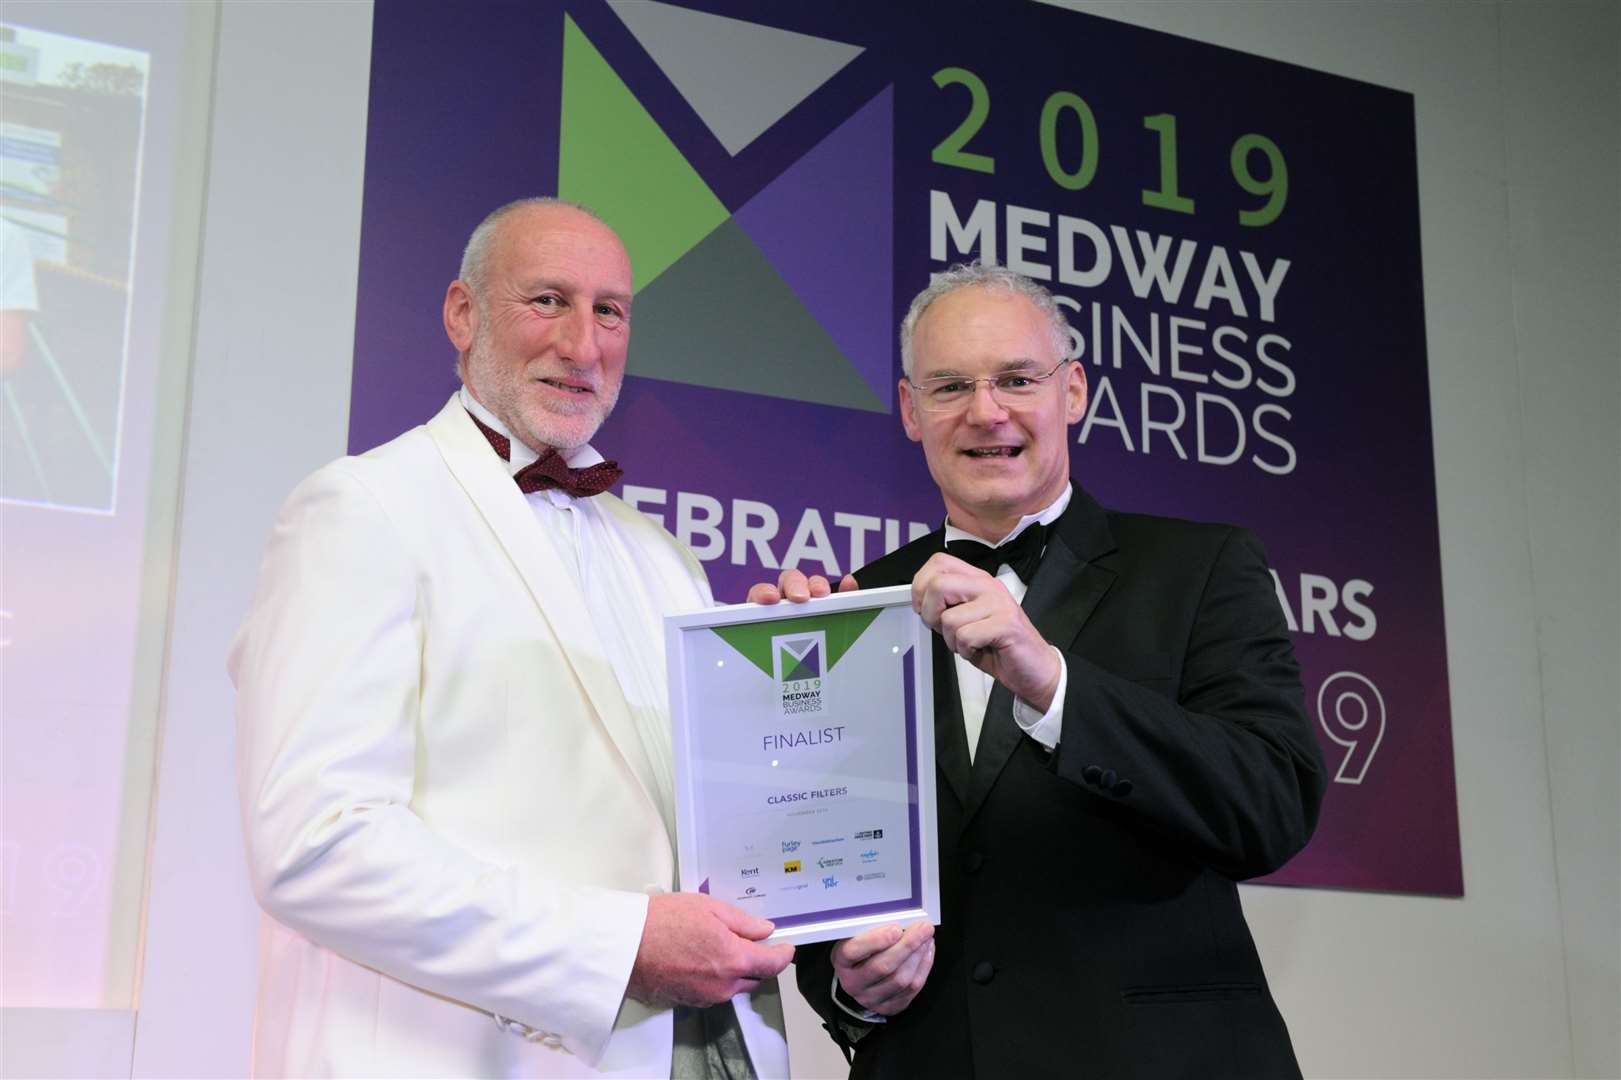 The Medway Business Awards were last held in 2019. Picture: Simon Hildrew